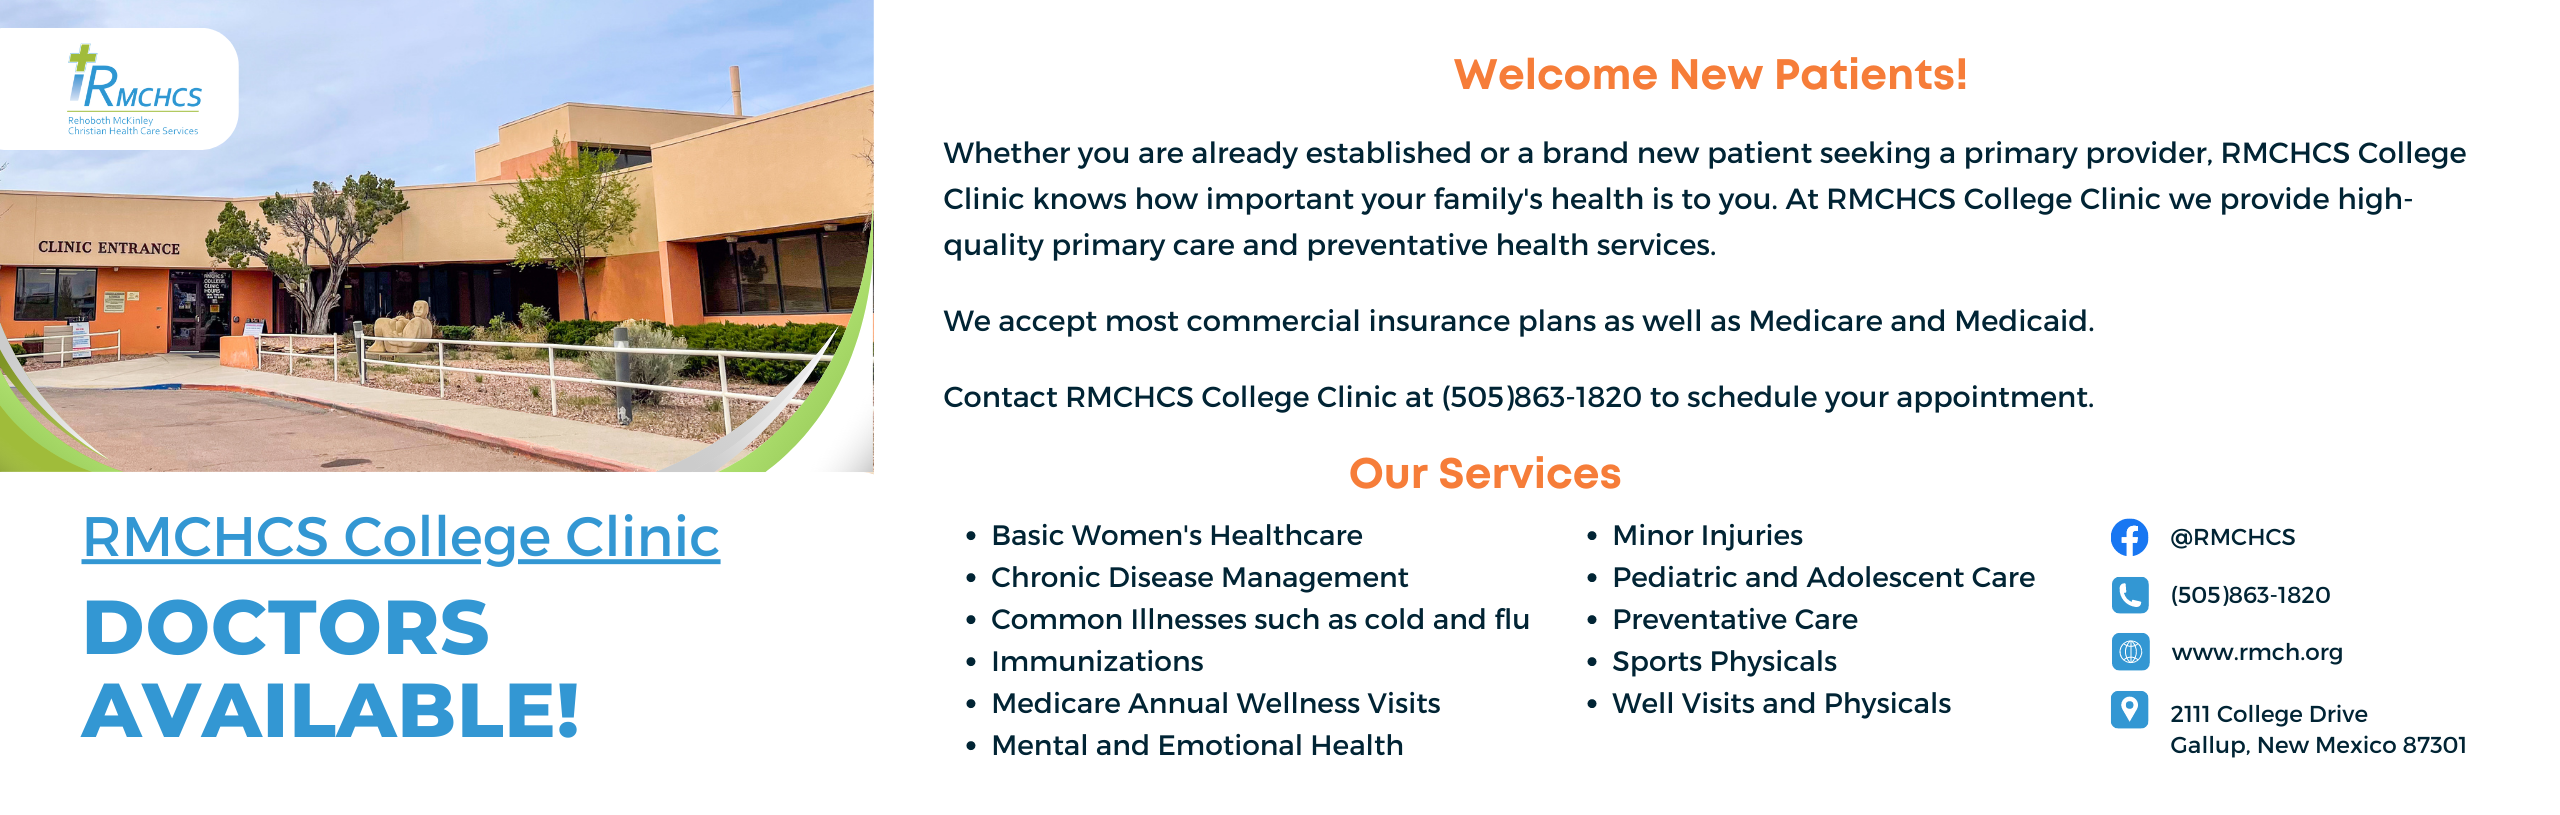 RMCHCS College Clinic Services available.